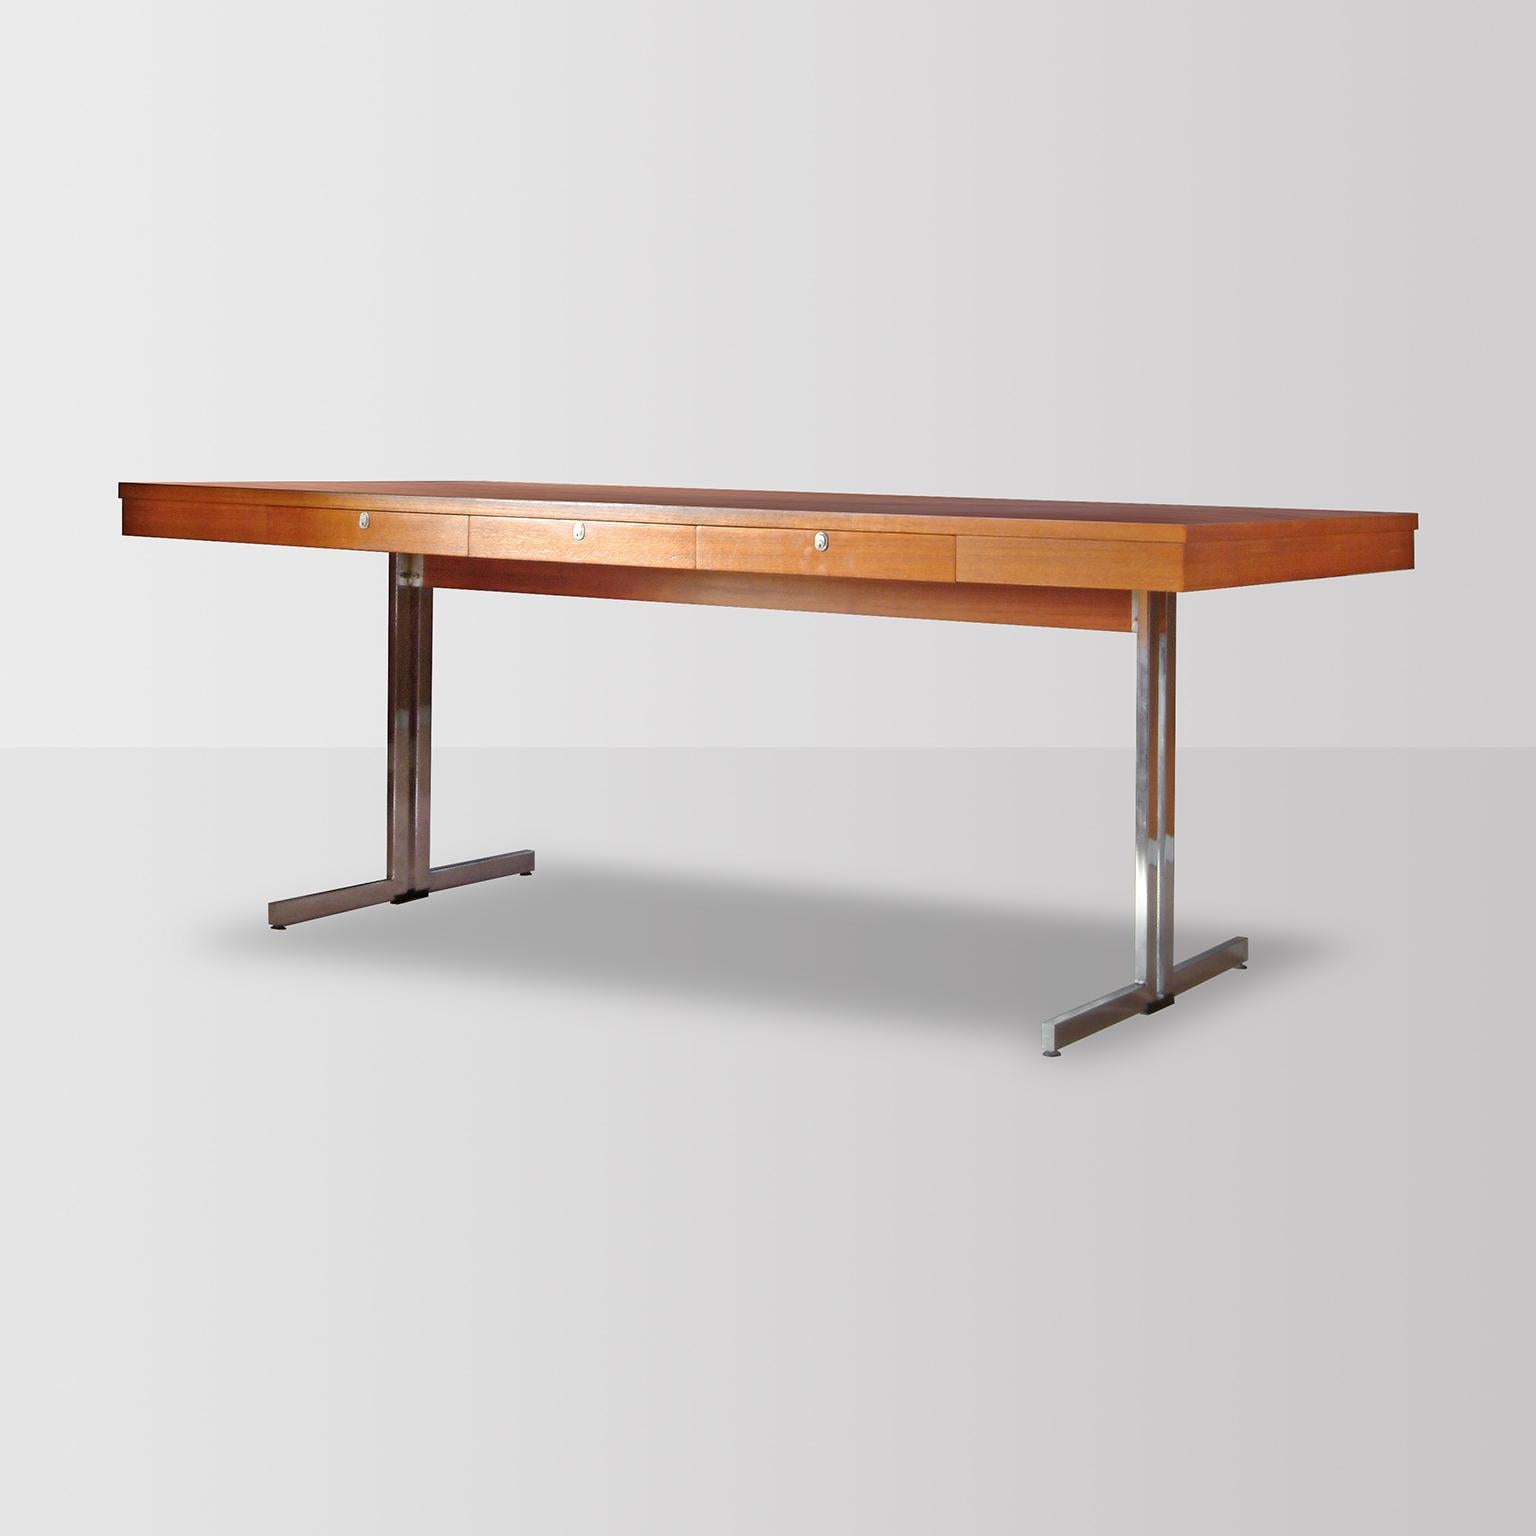 Mid-Century Executive Desk in walnut veneered wood and chrome plated metal. From the 